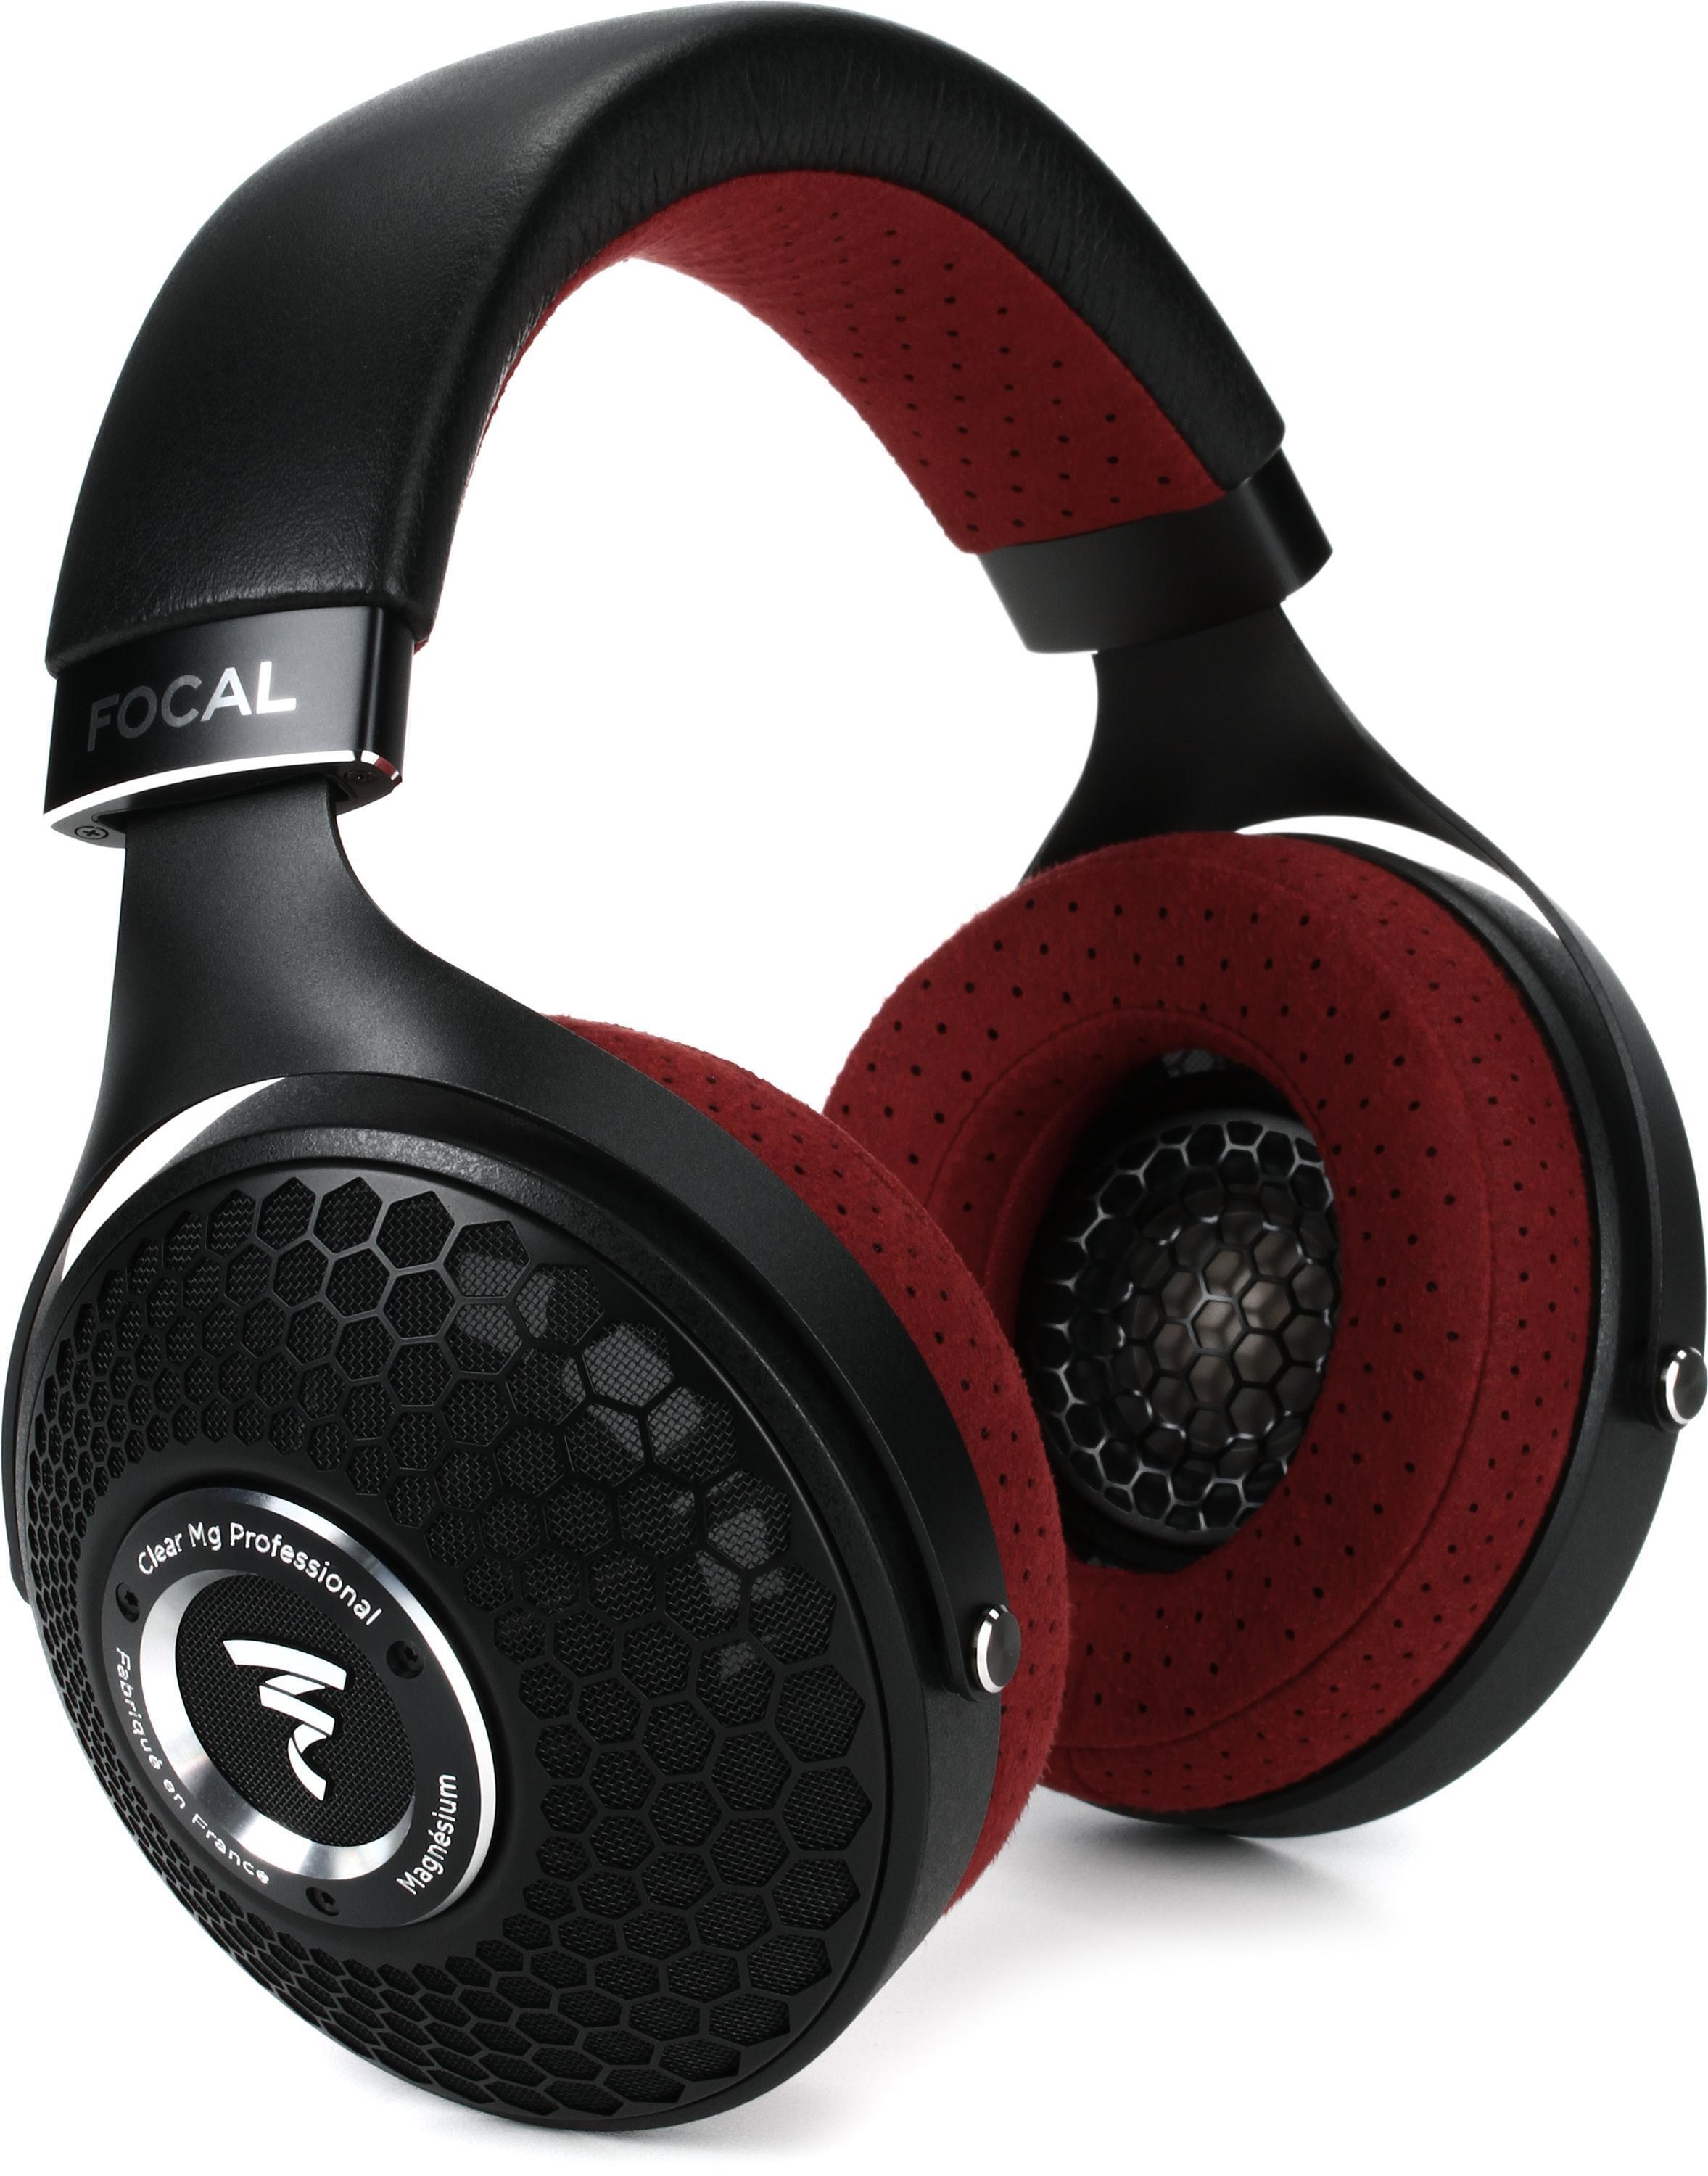 Focal Clear Mg Professional Open-back Reference Studio Headphones